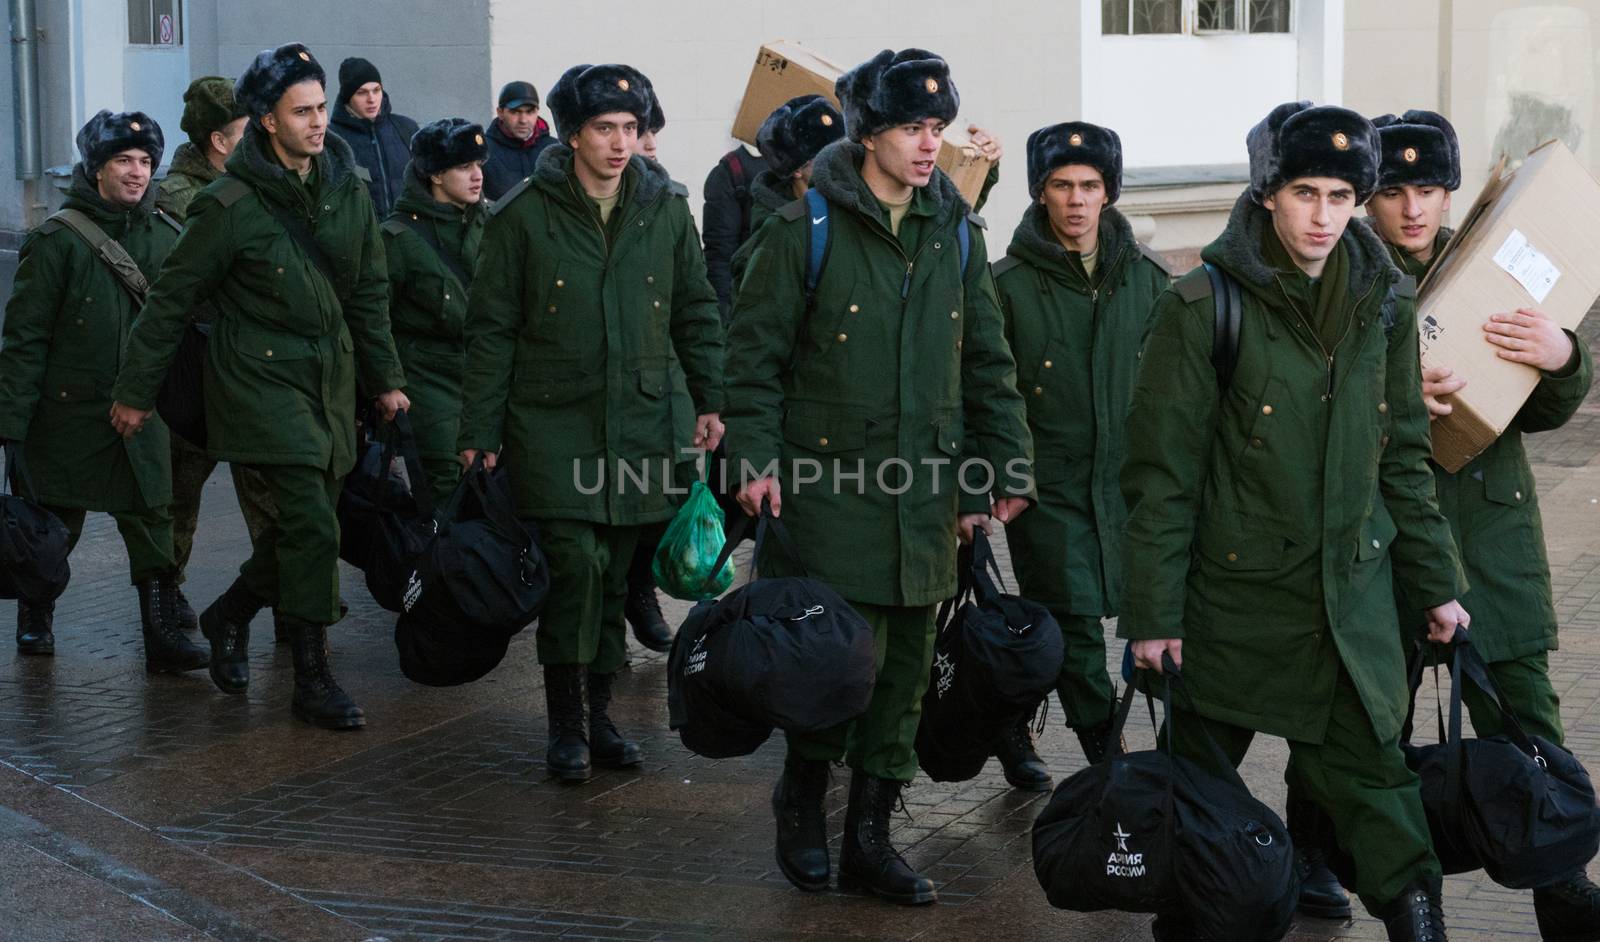 Moscow, December 2016 - The soldiers recruits in green uniforms with boxes go and look